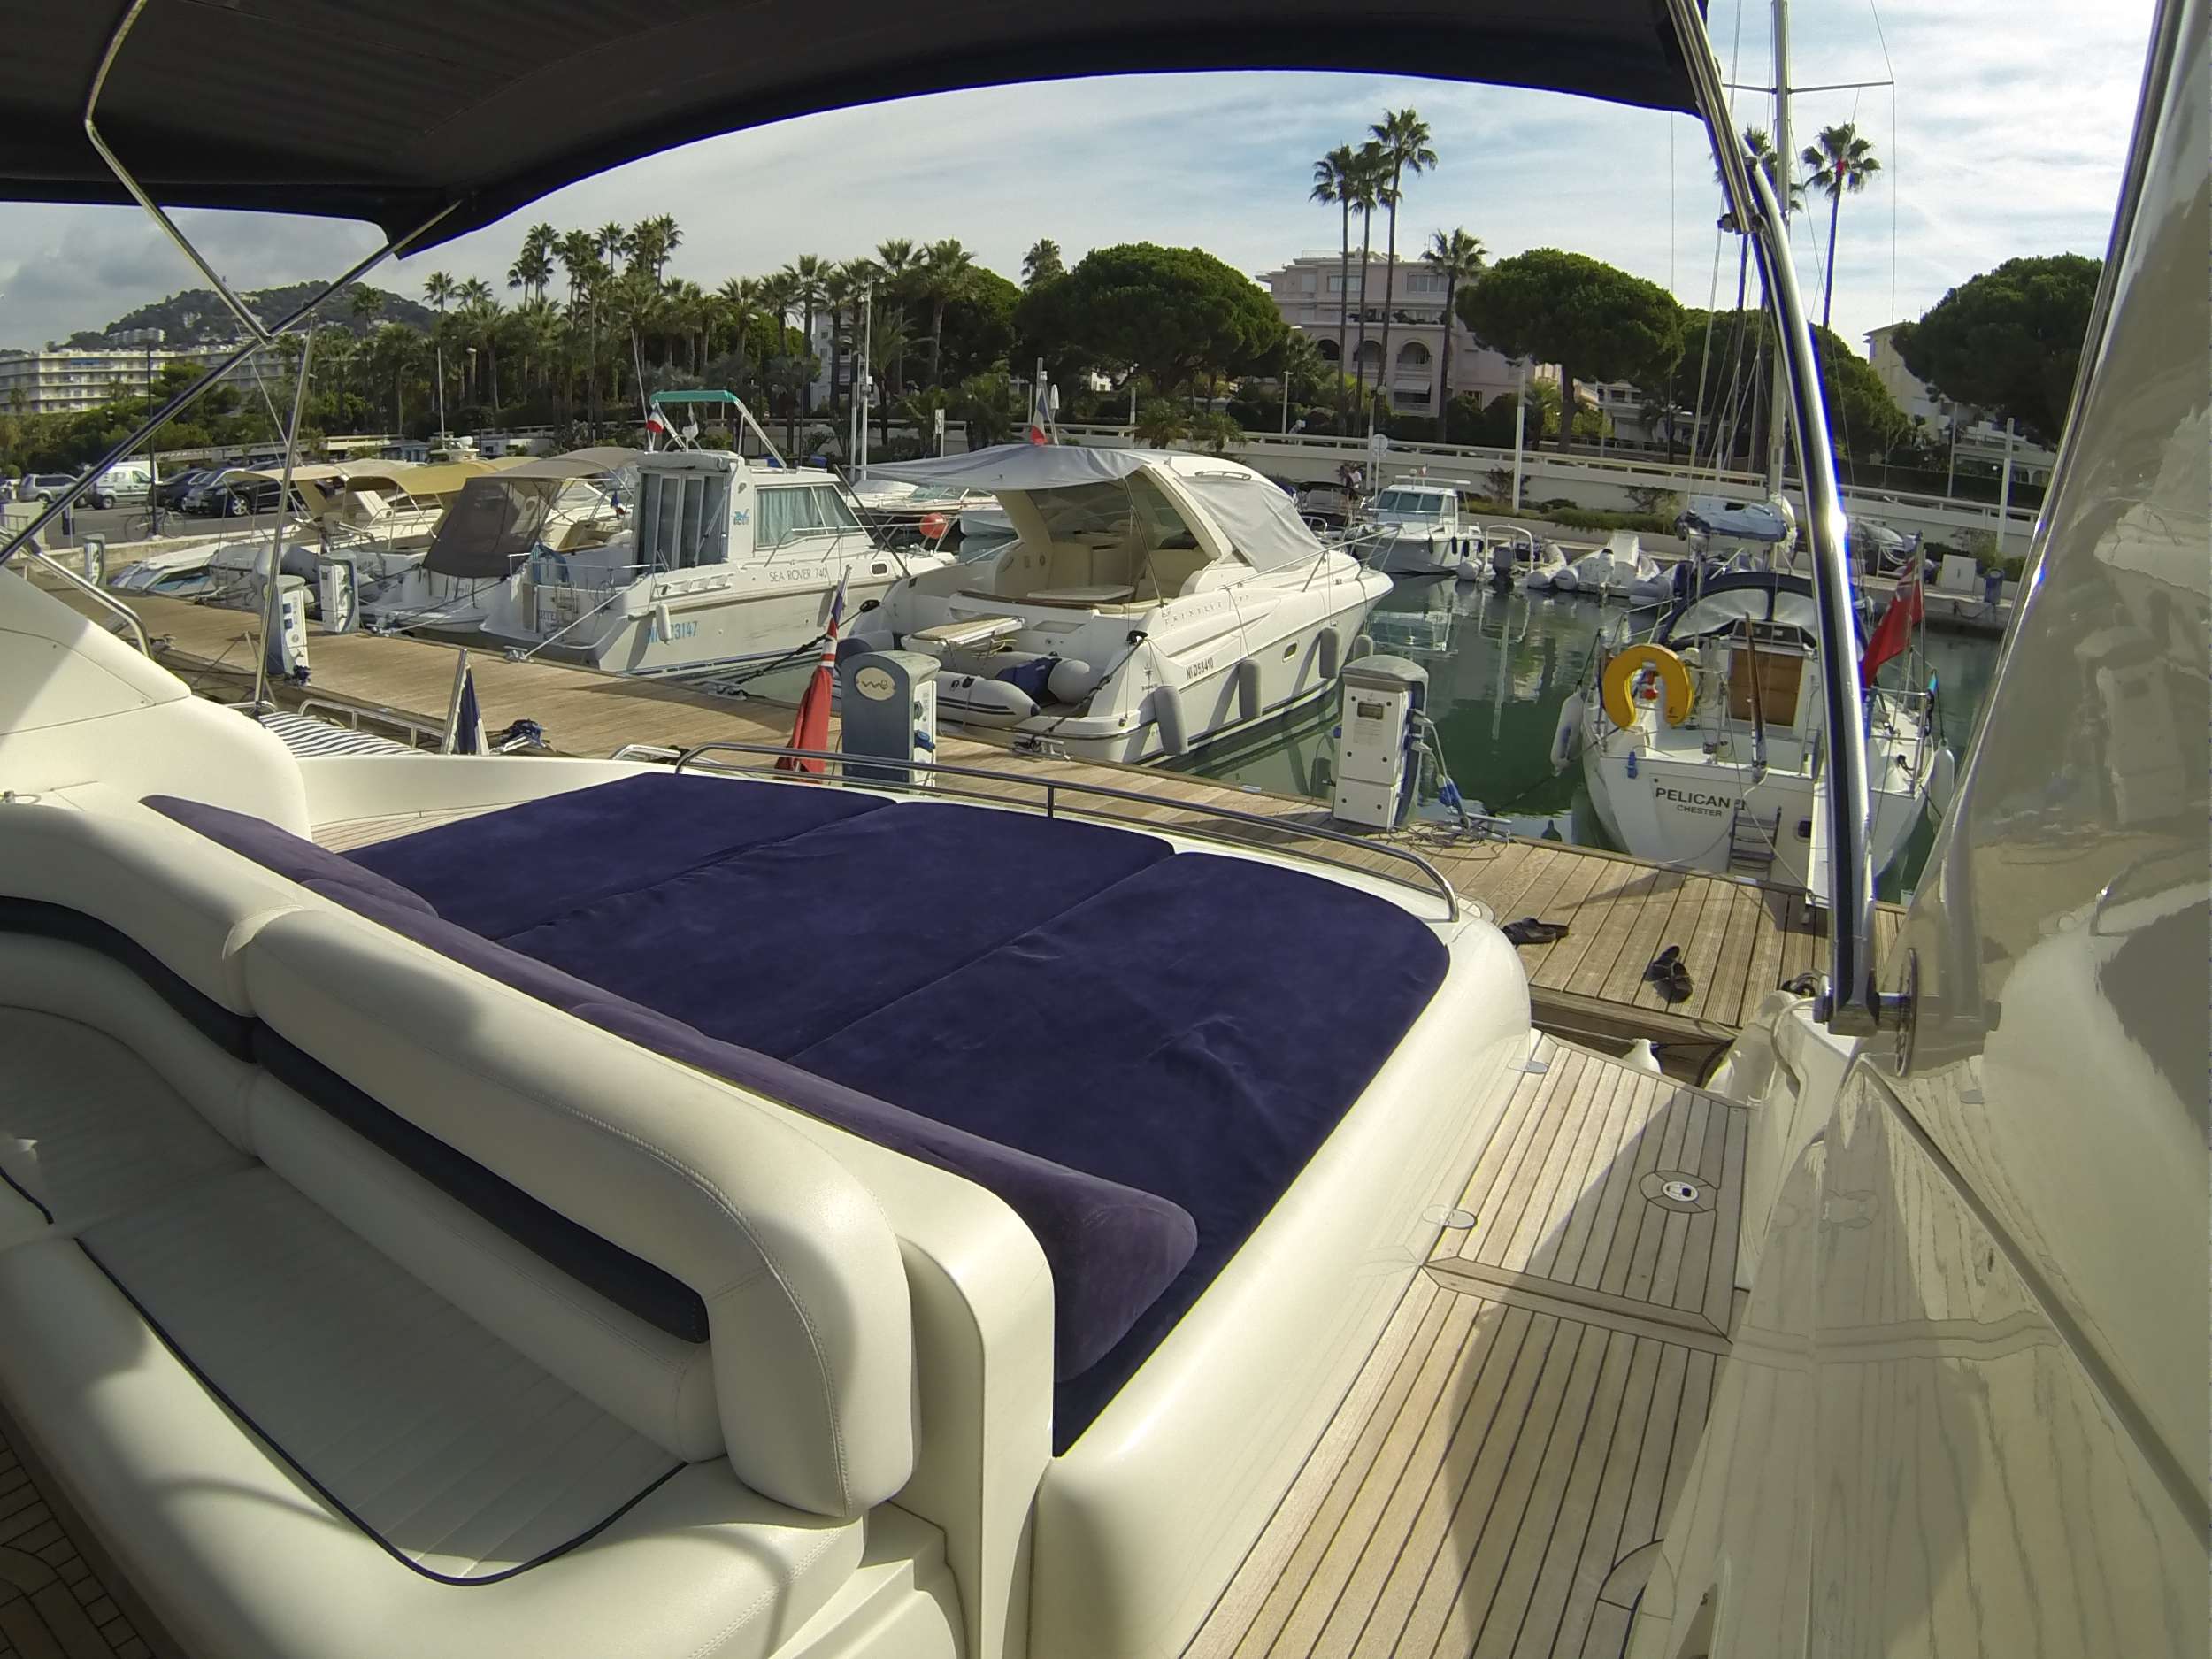 Anthinea - Yacht Charter Cannes & Boat hire in Fr. Riviera, Corsica & Sardinia 4